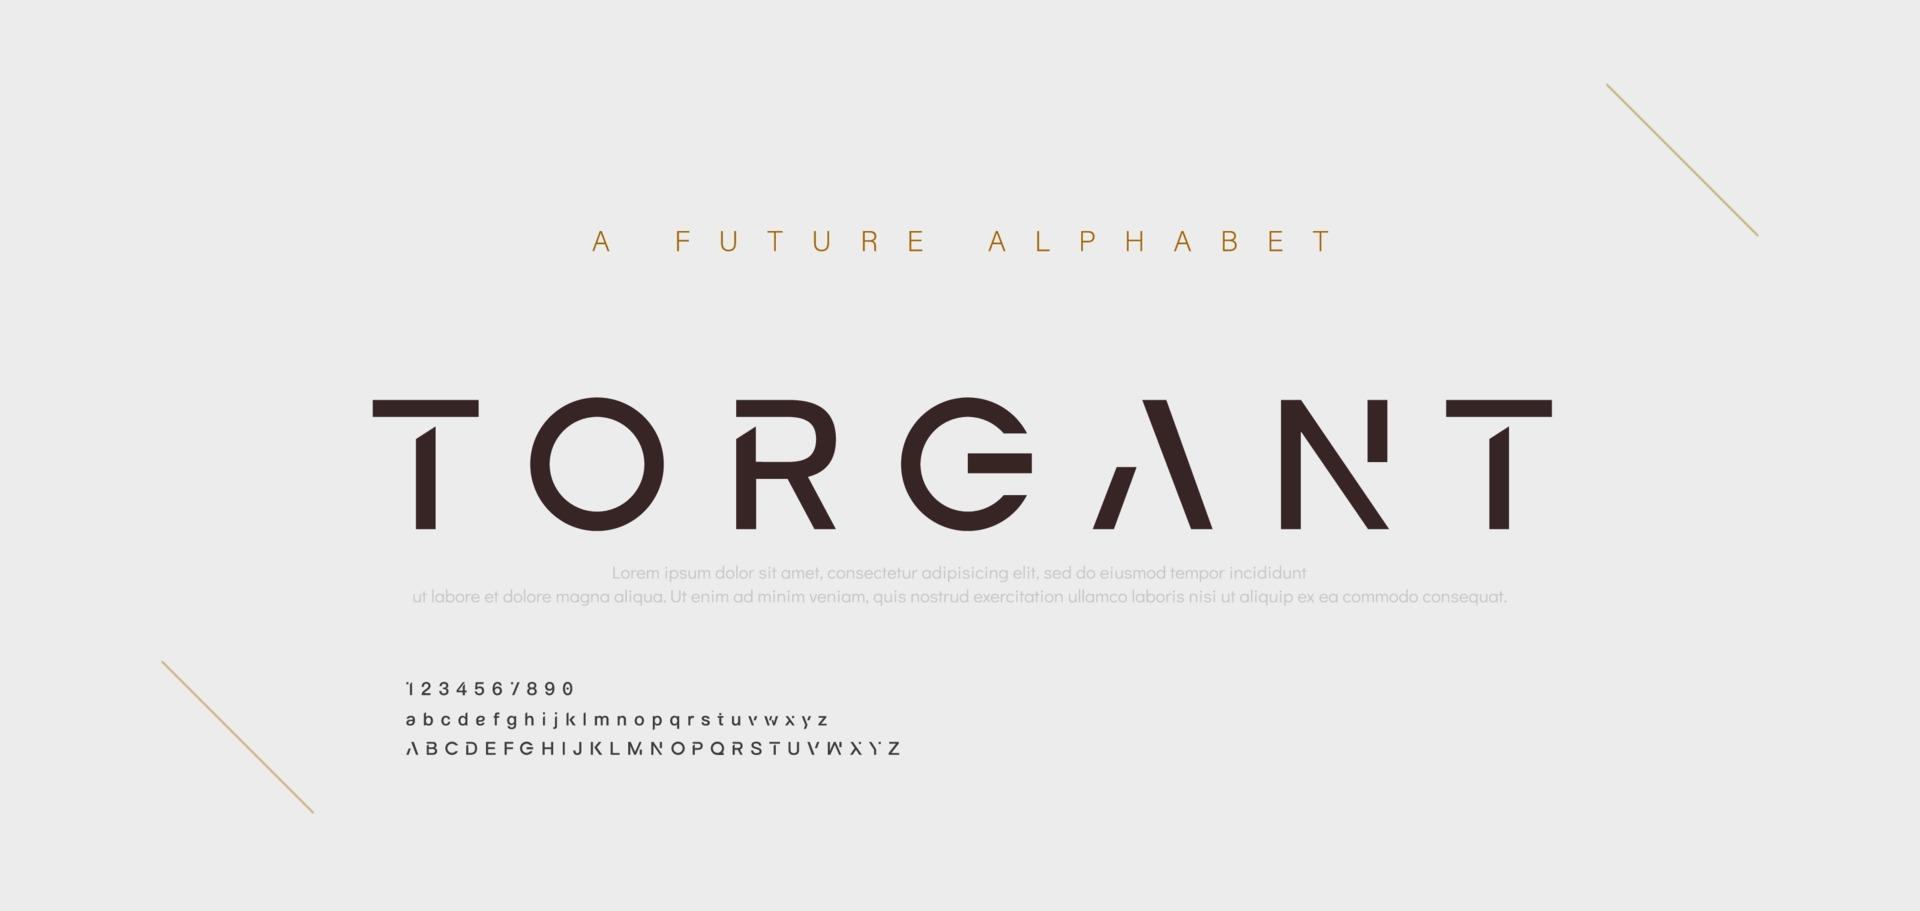 Abstract minimal modern alphabet fonts. Typography technology electronic digital music future creative font vector